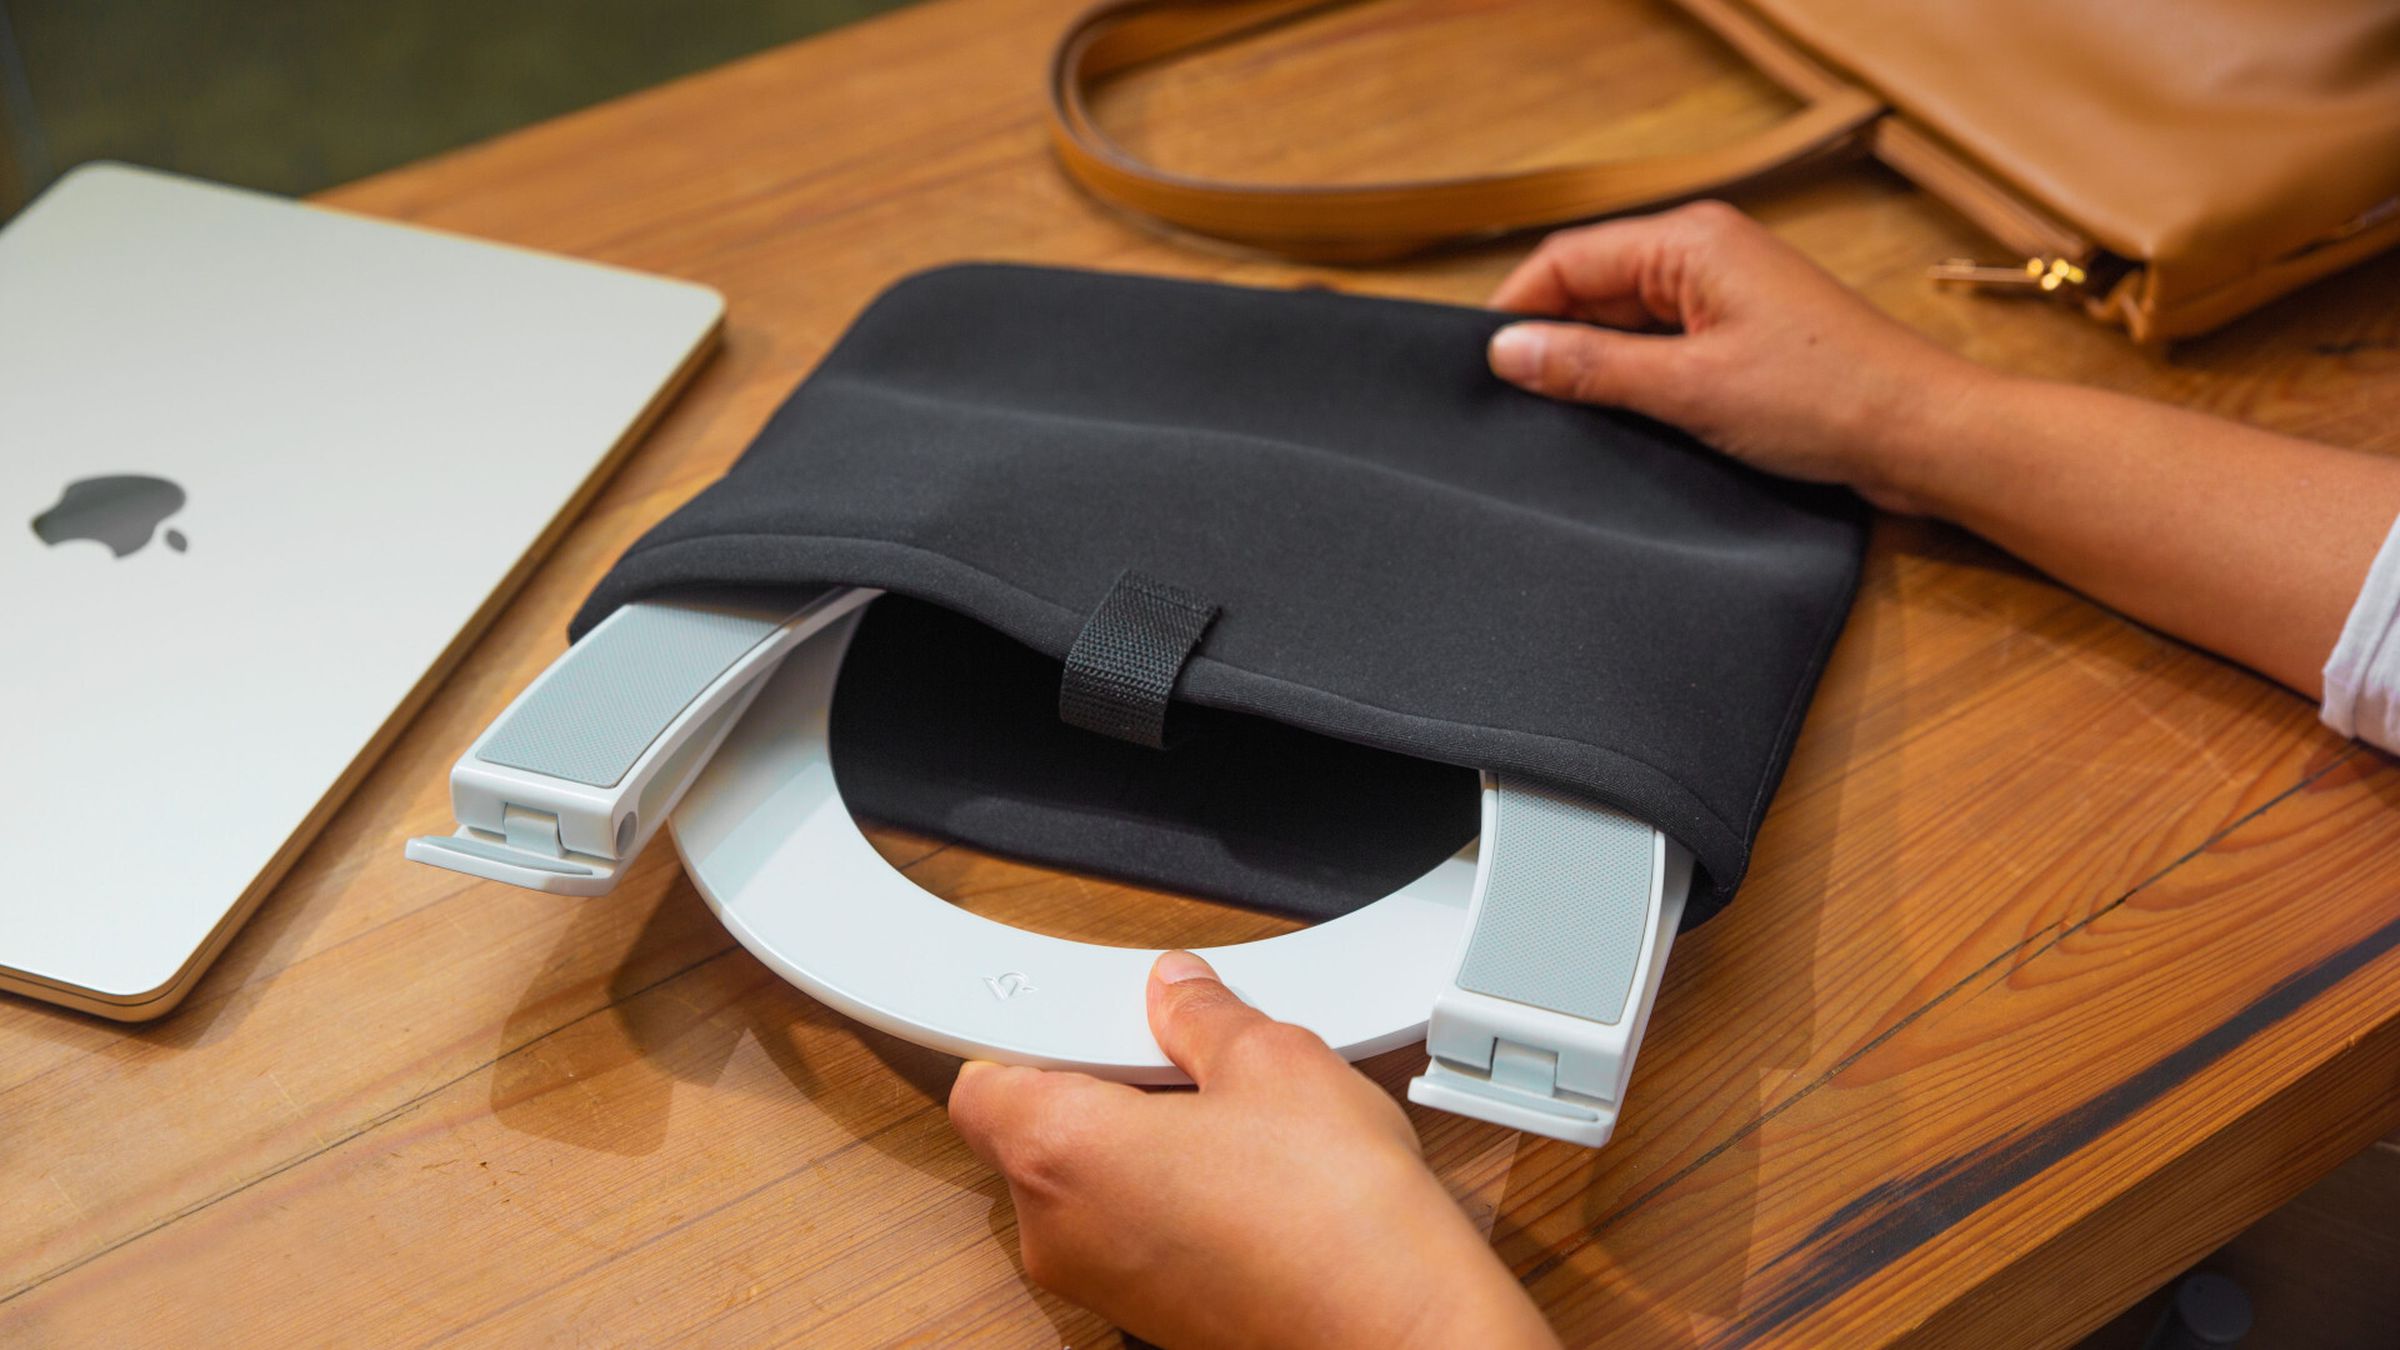 The Twelve South Curve Flex laptop stand being placed into its protective sleeve.